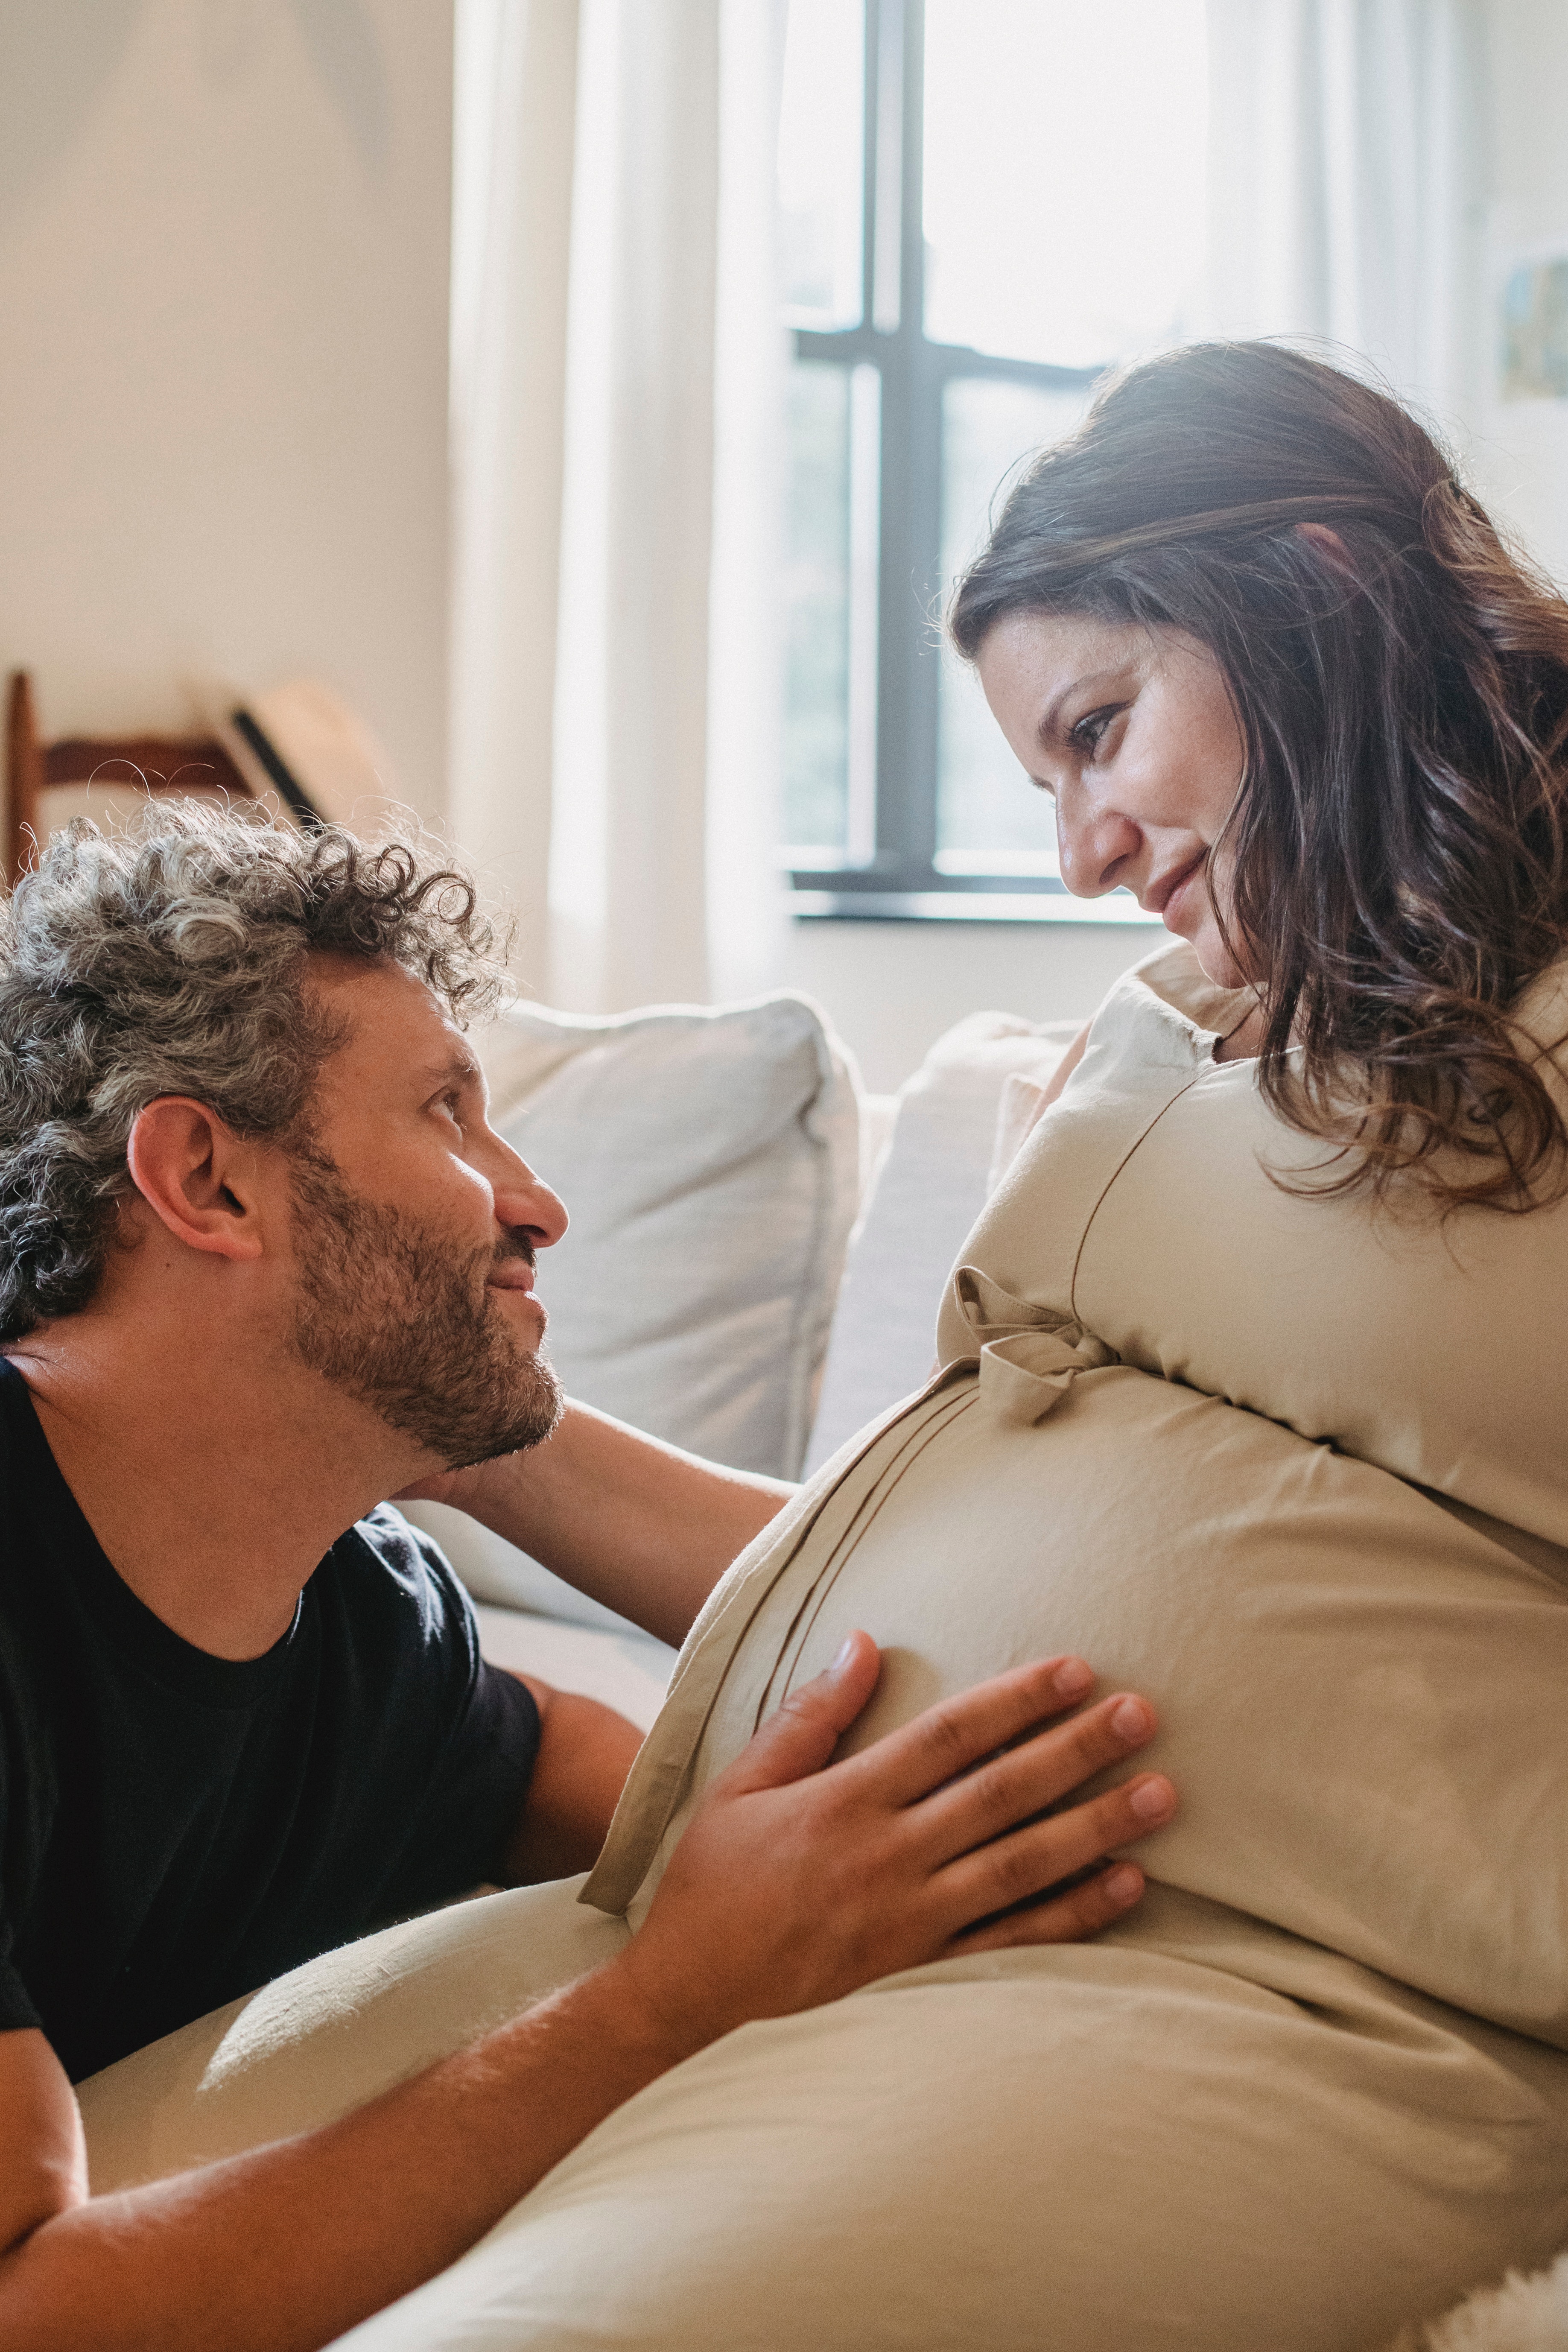 A pregnant woman and her partner gazing lovingly at one another. | Source: Pexels